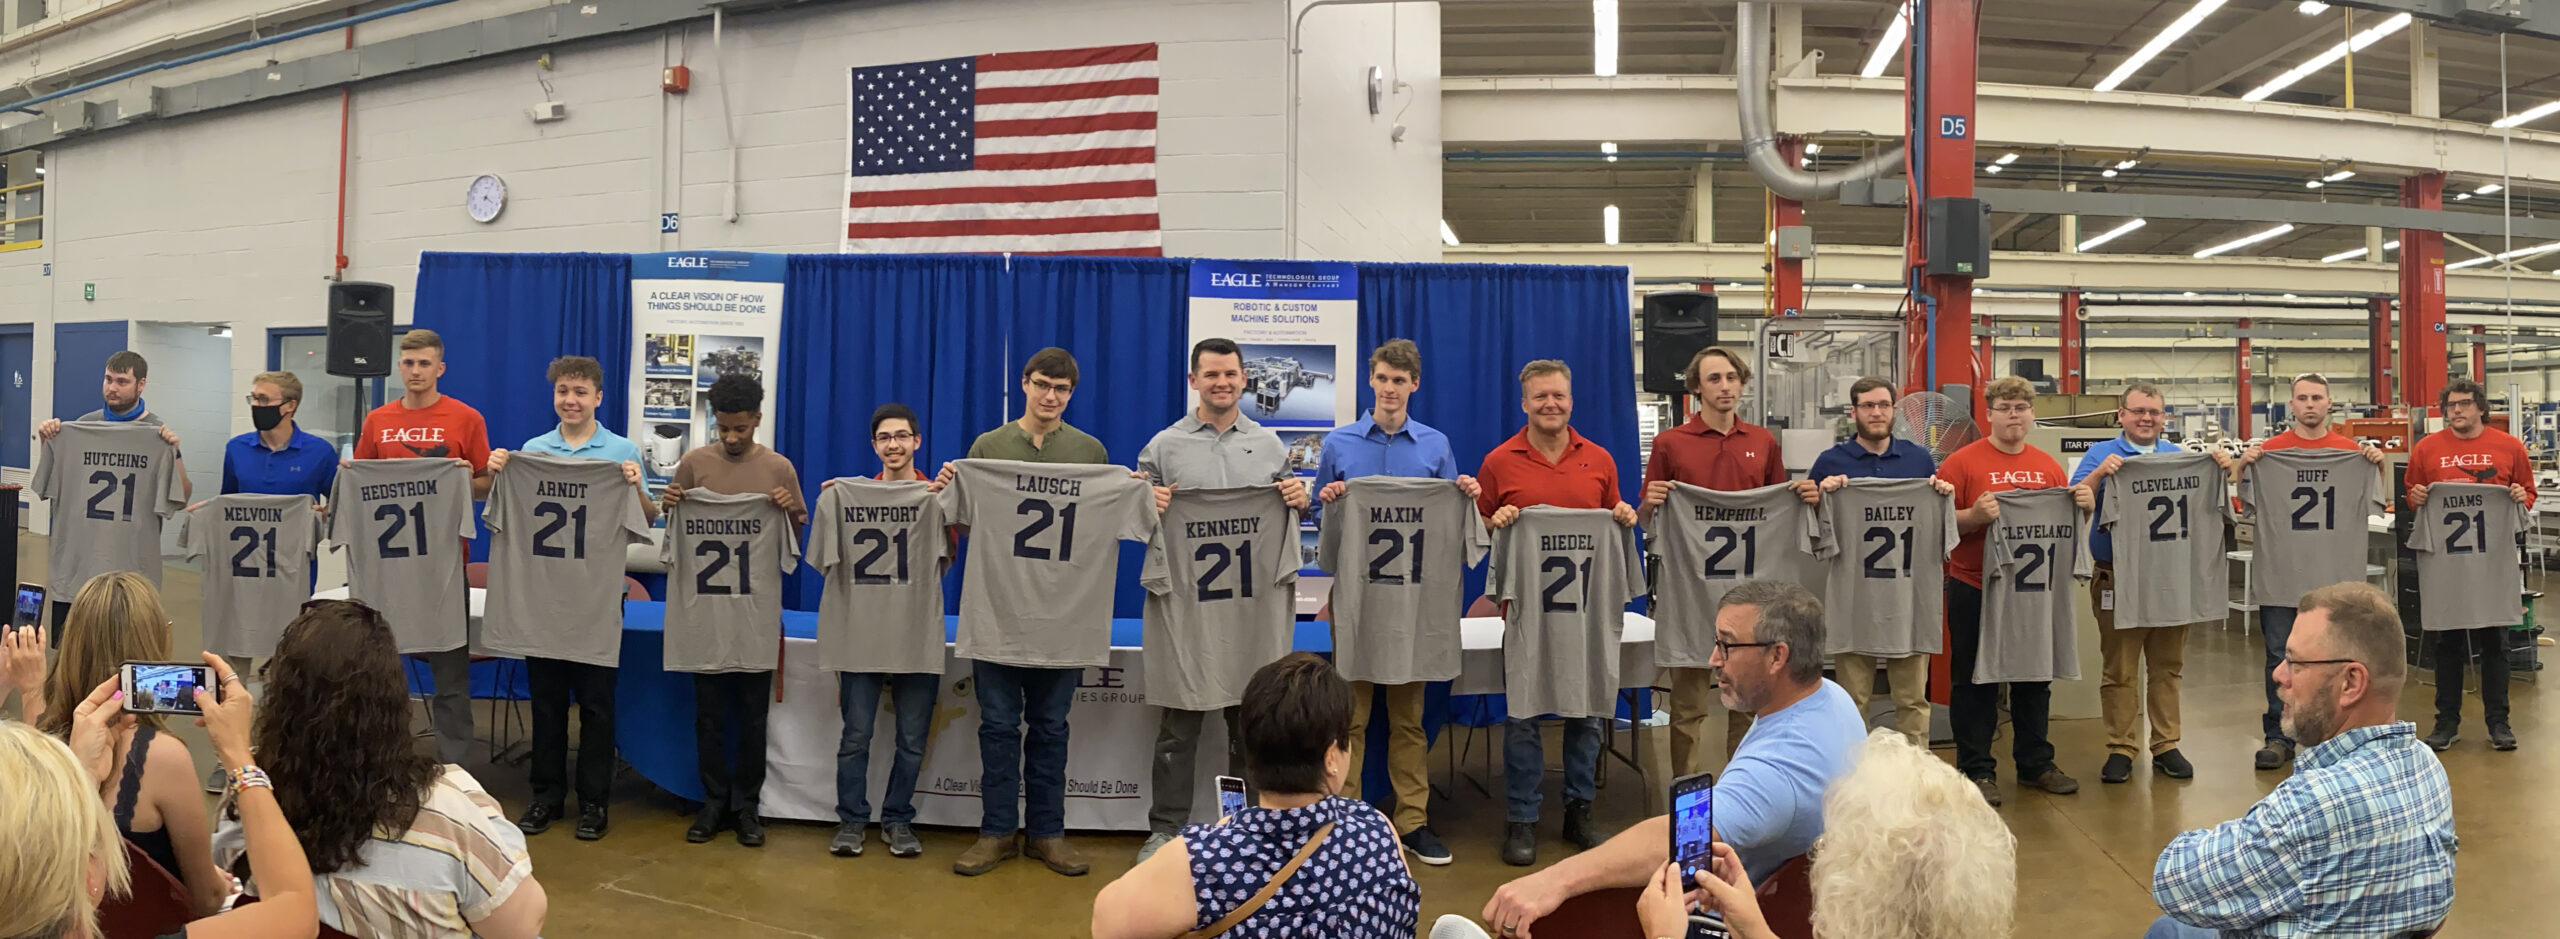 participants in the Eagle’s apprenticeship program holding their customized T-shirts